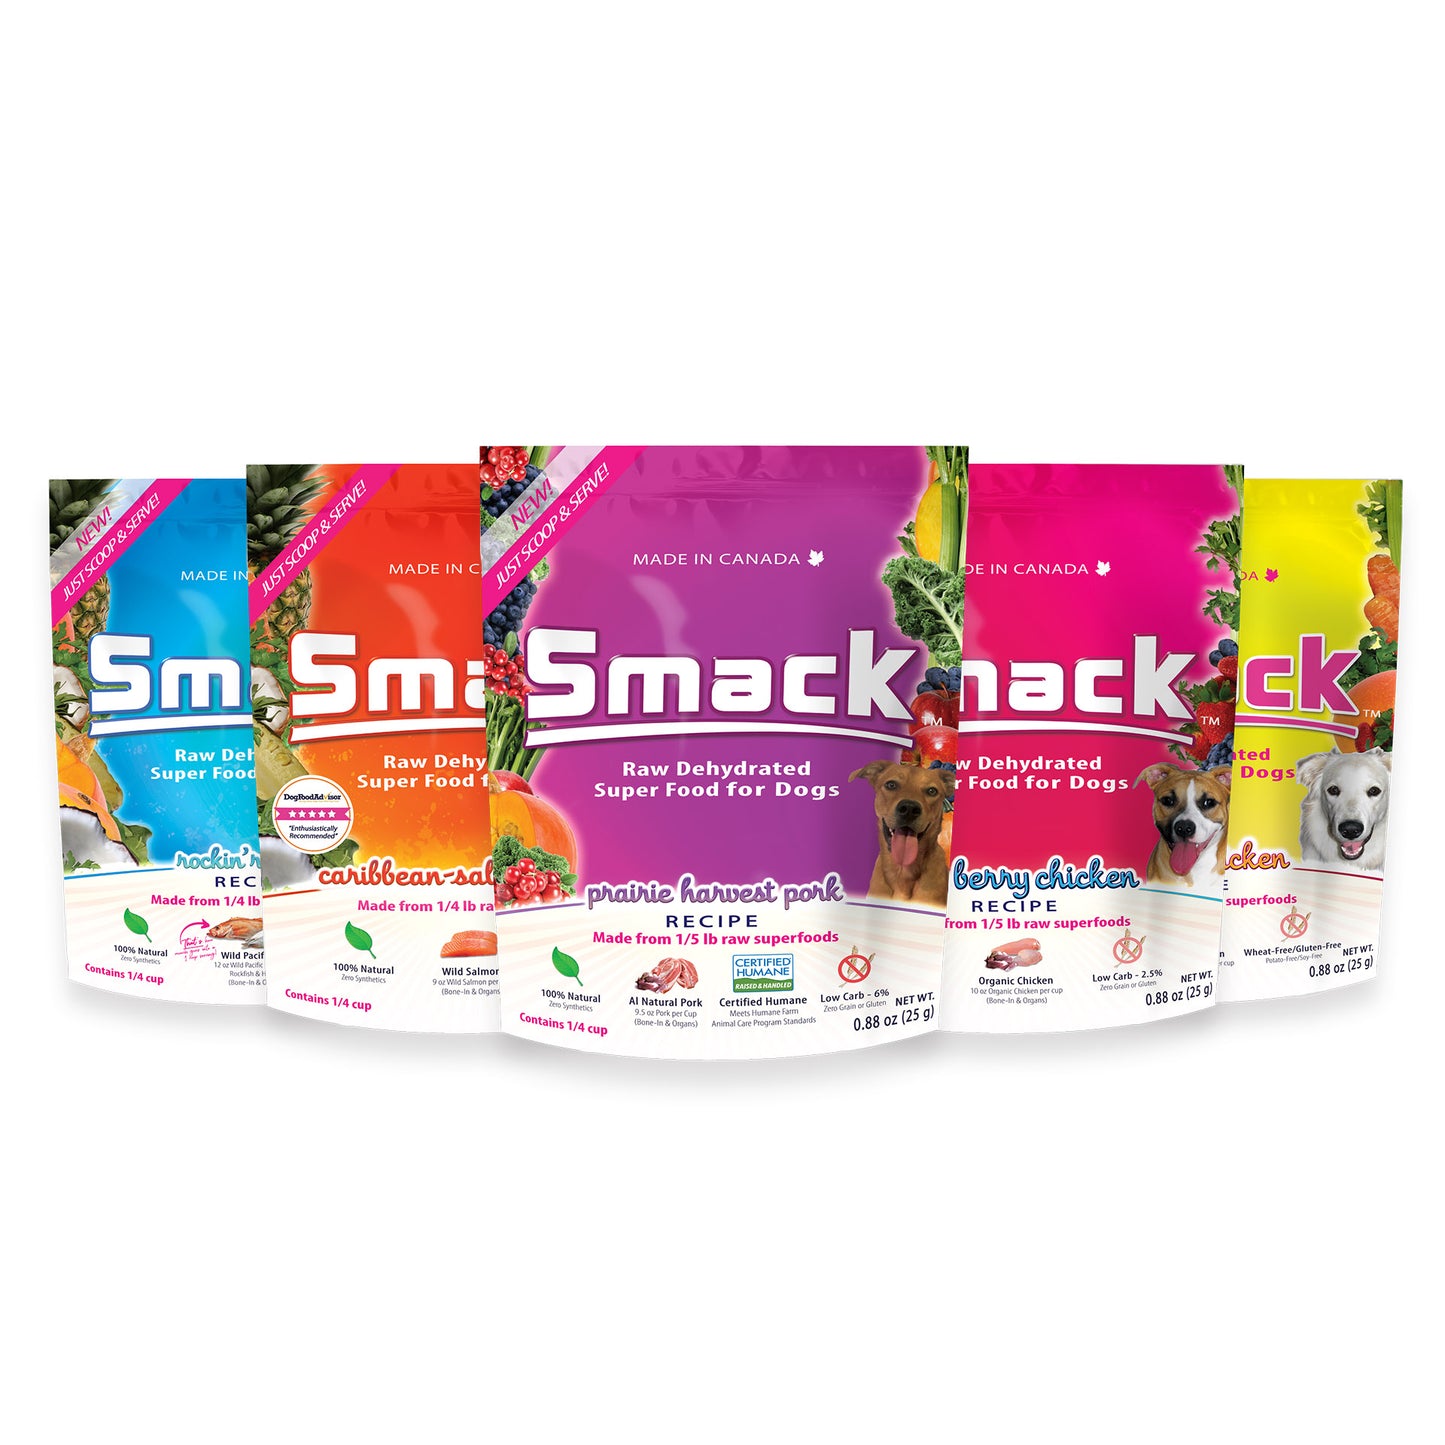 Smack™ Raw Dehydrated Super Food for Dogs